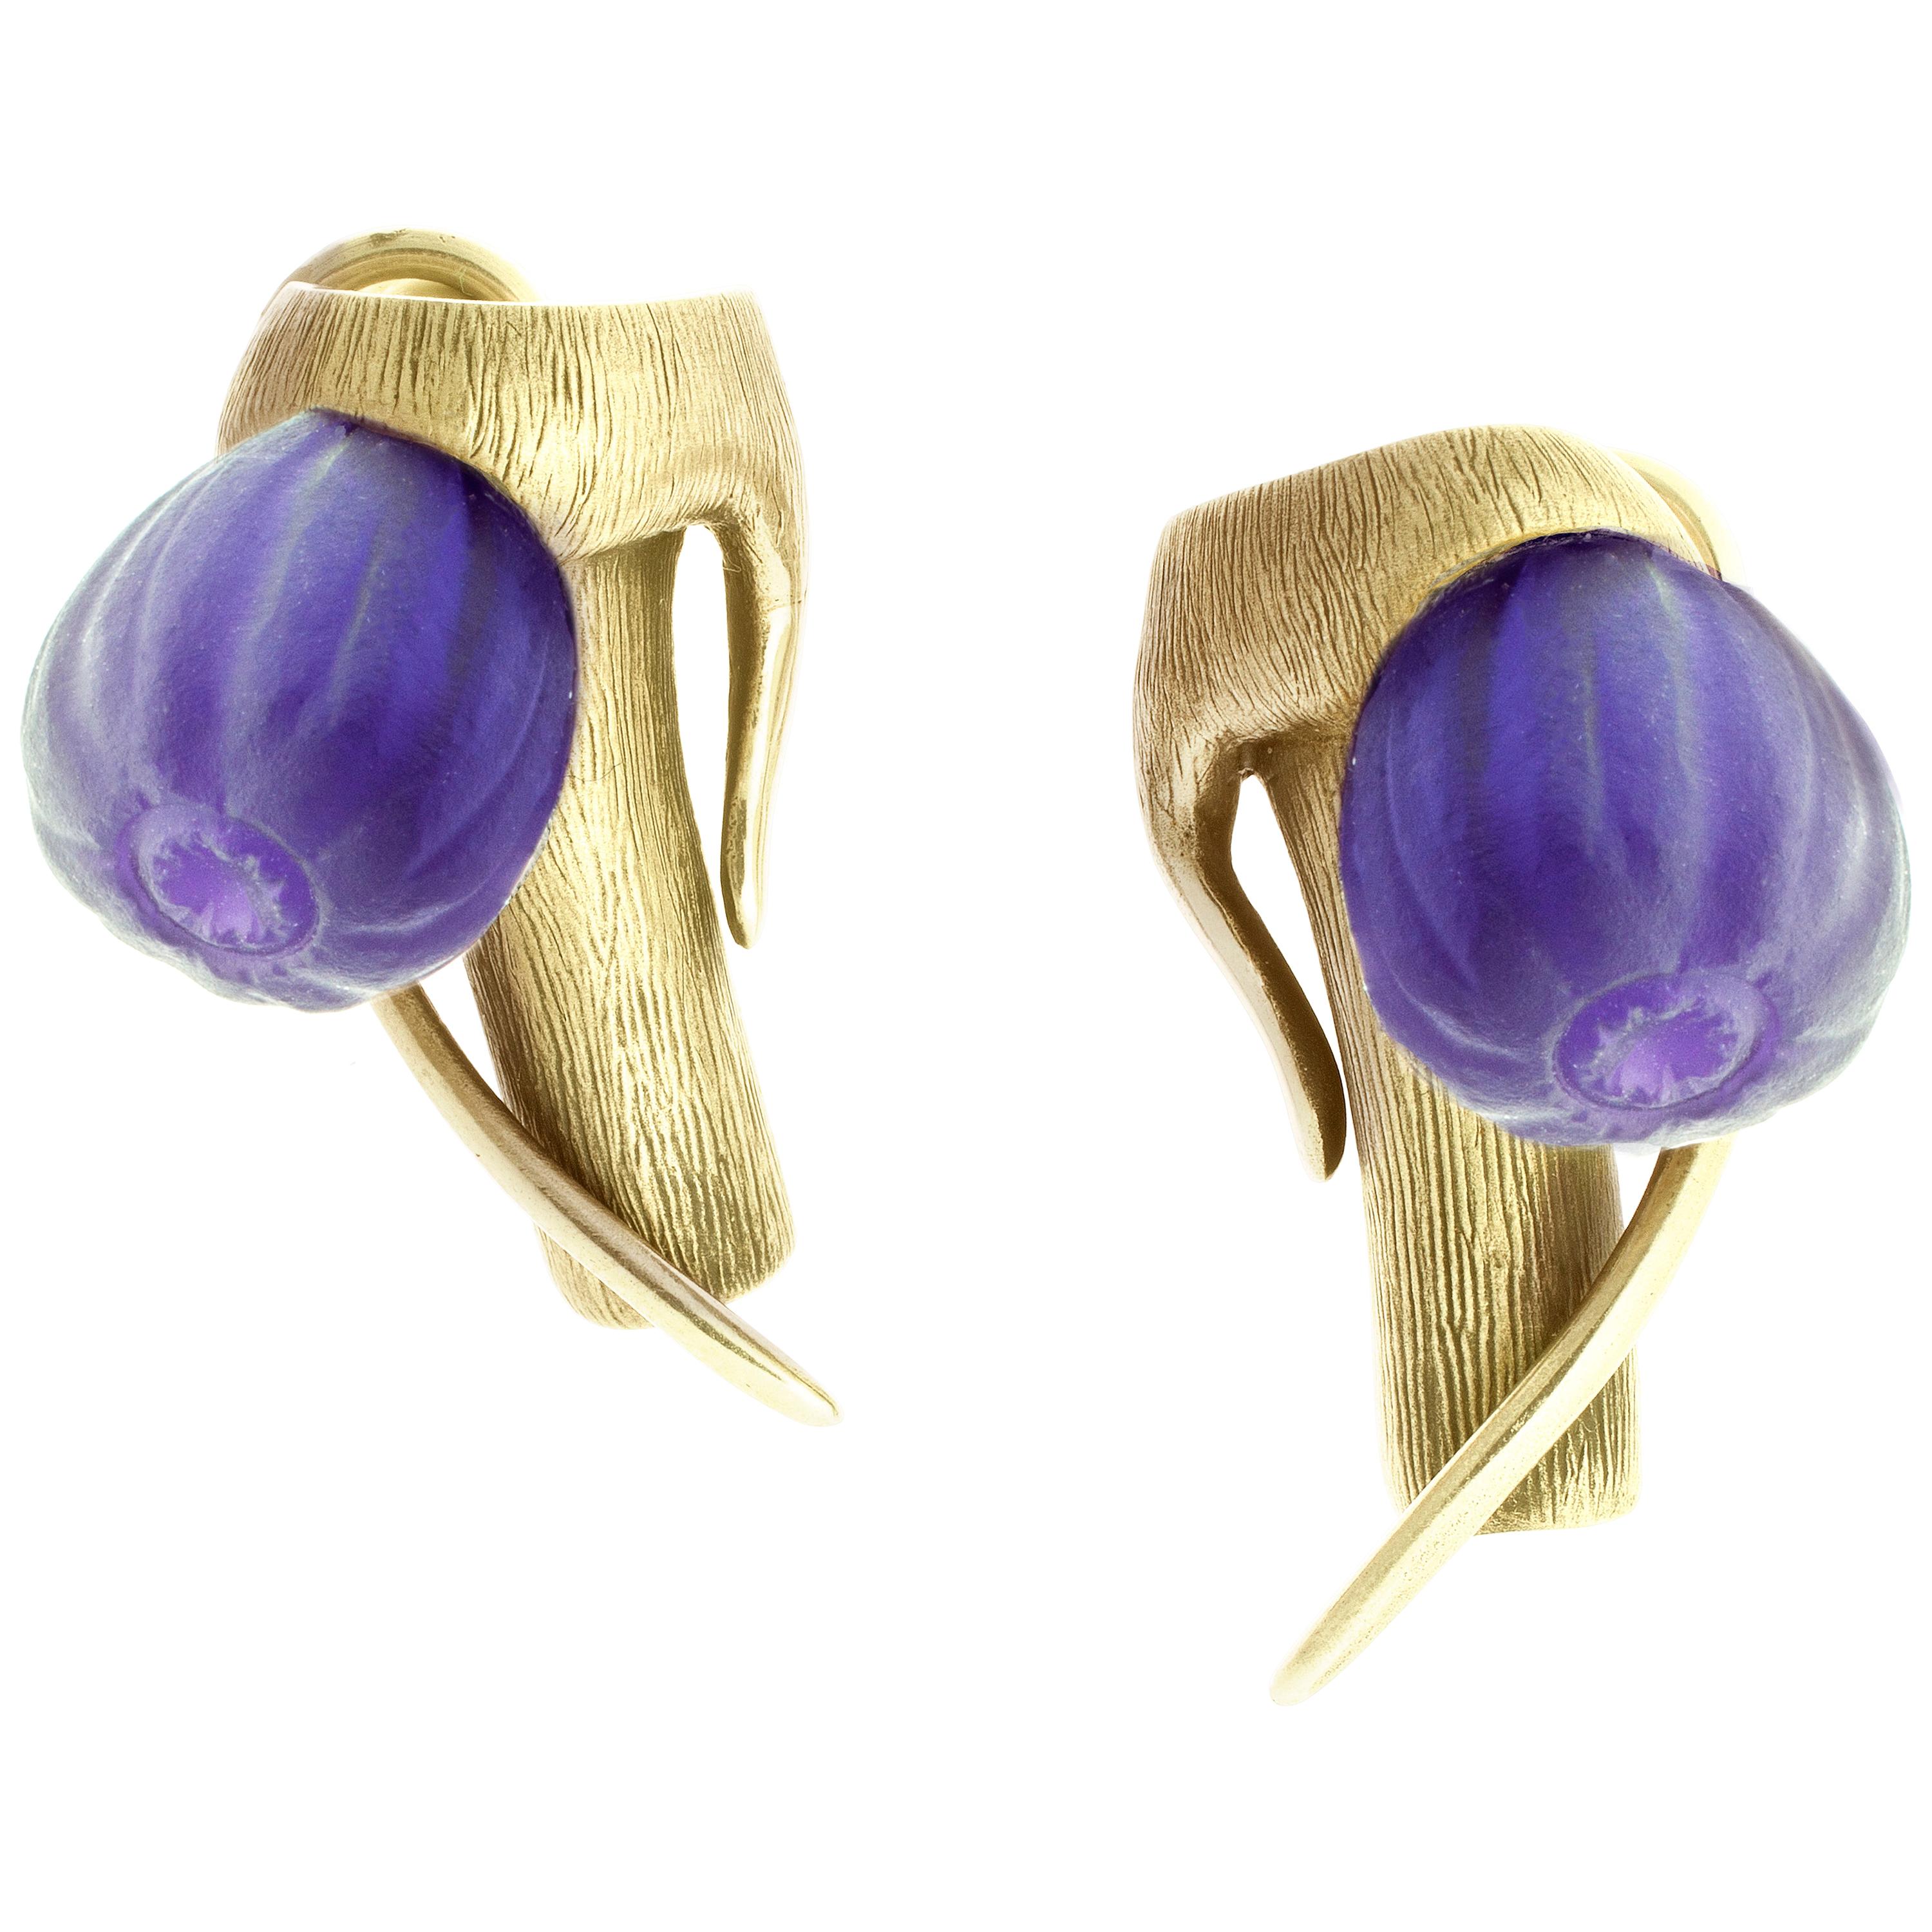 Eighteen Karat Yellow Gold Art Nouveau Cocktail Fig Earrings with Amethysts